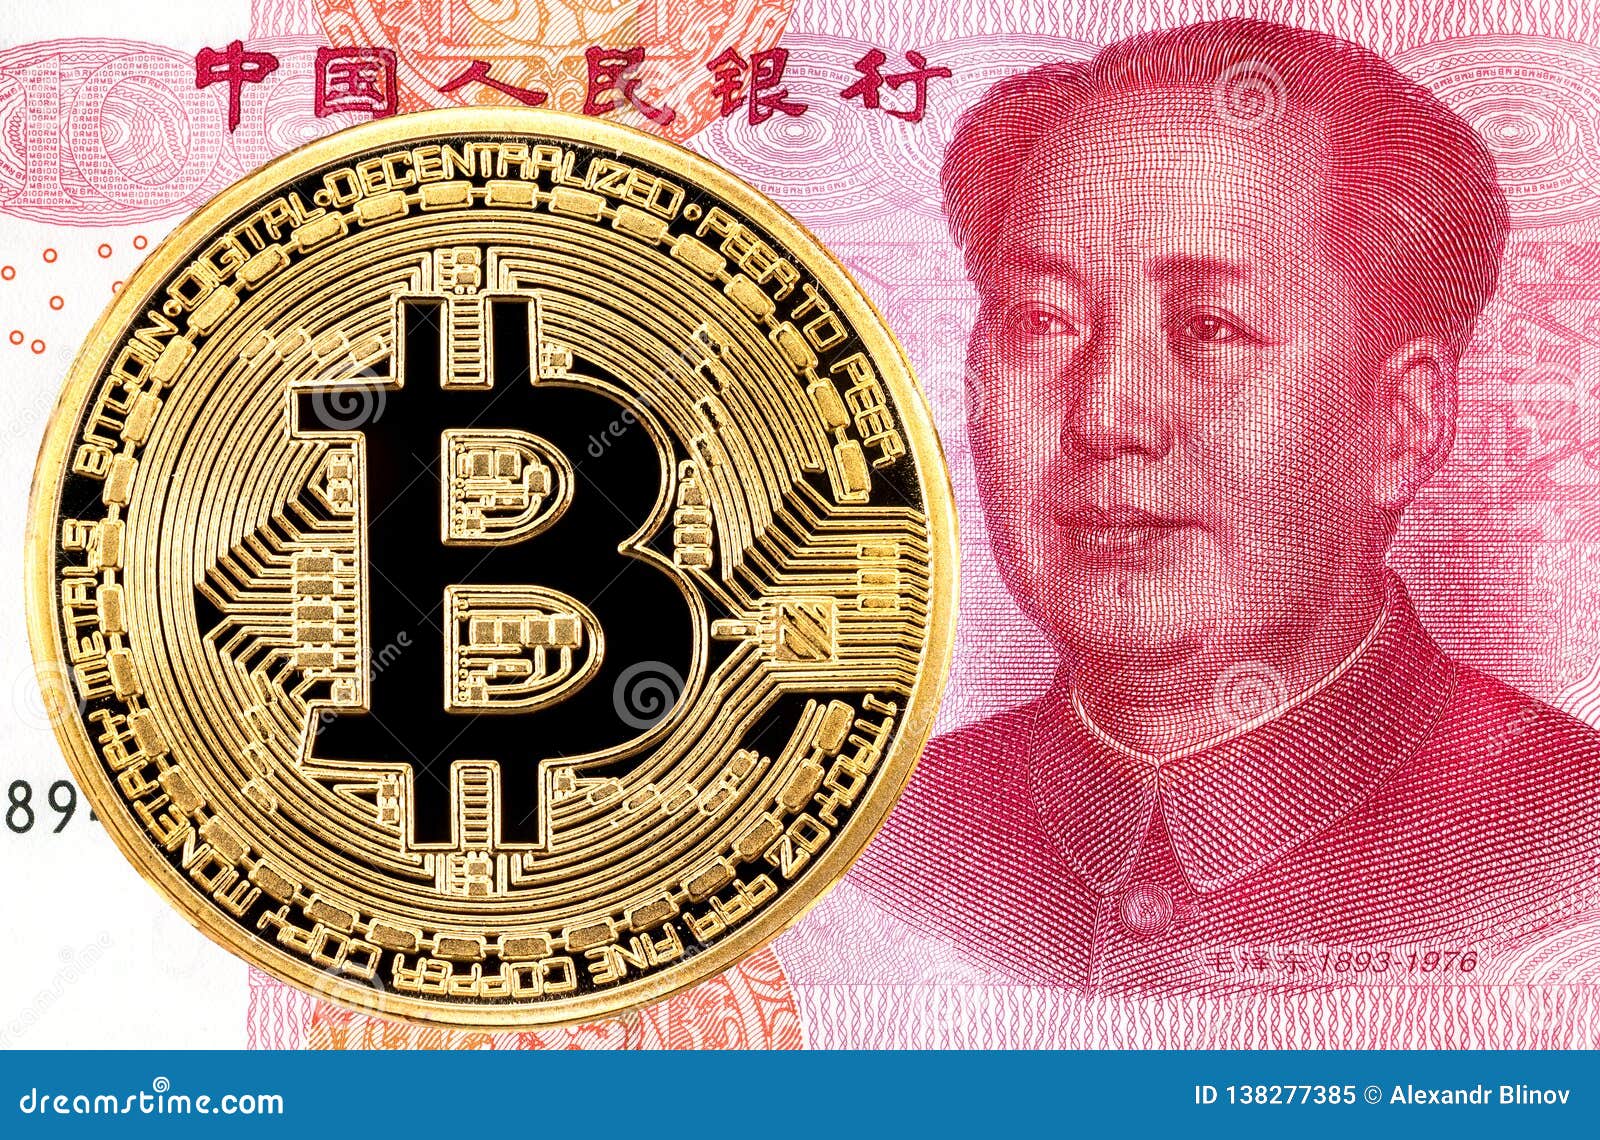 what is the chinese crypto coin called